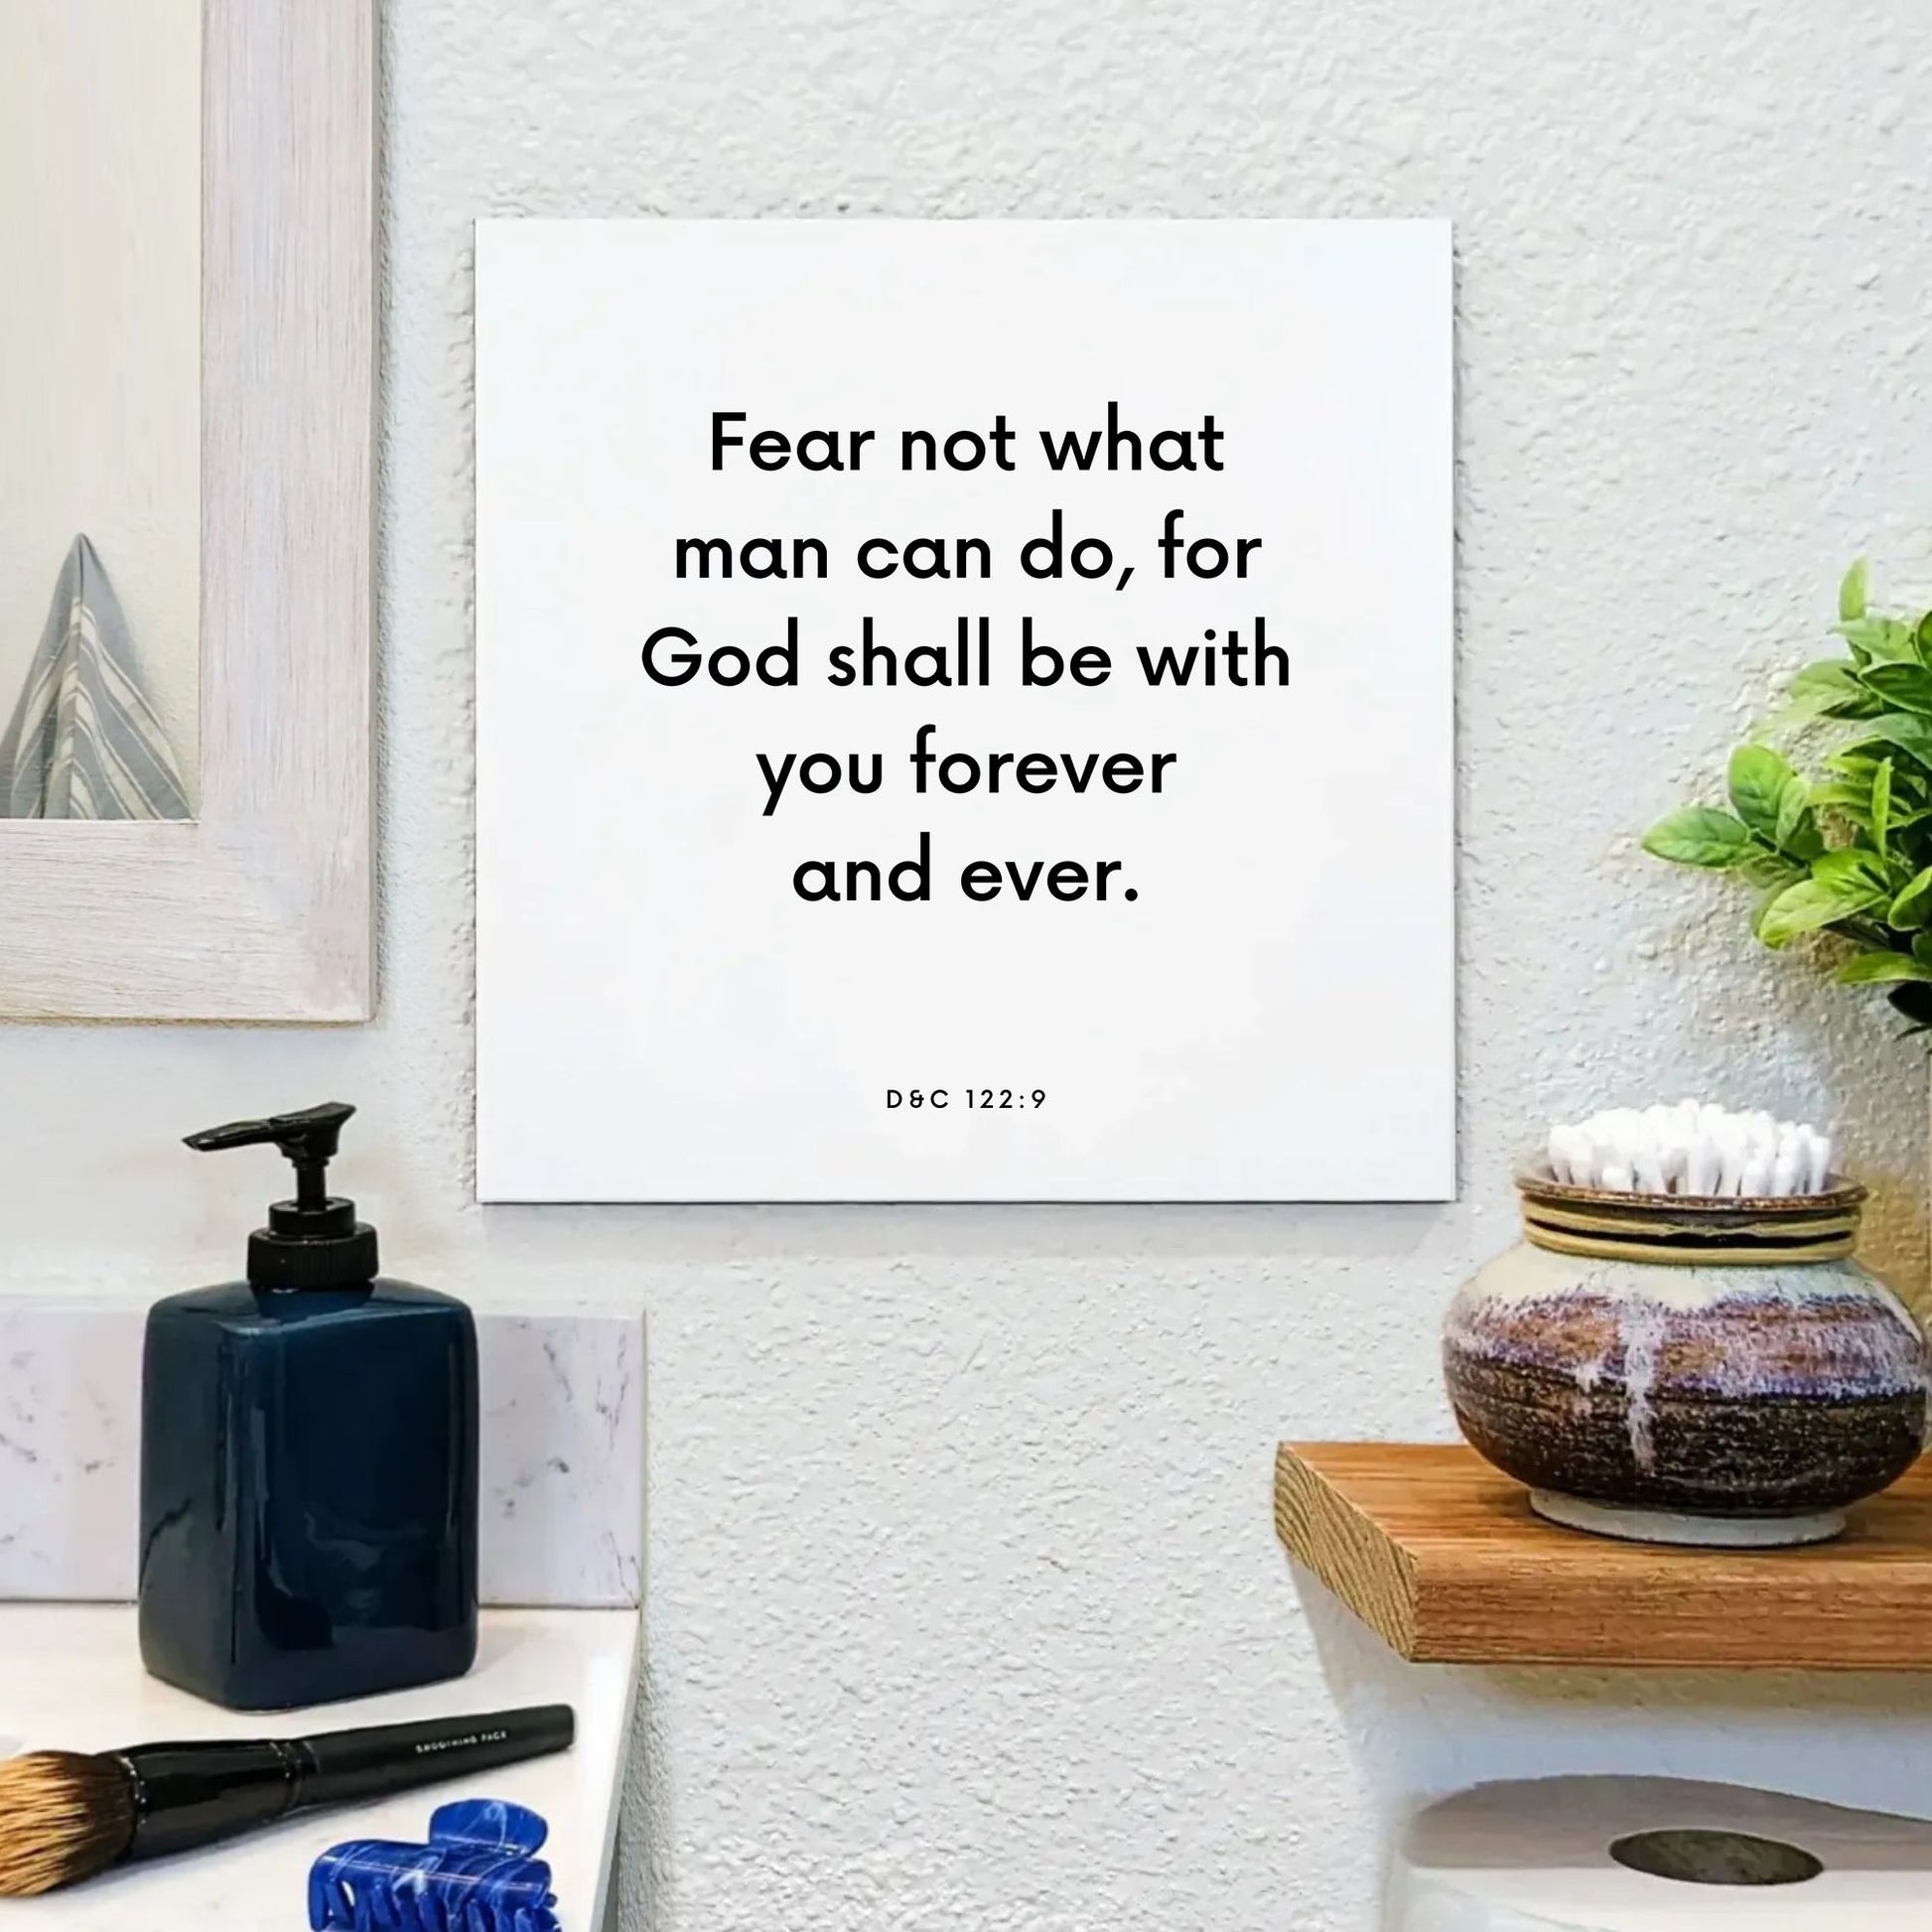 Bathroom mouting of the scripture tile for D&C 122:9 - "Fear not what man can do"